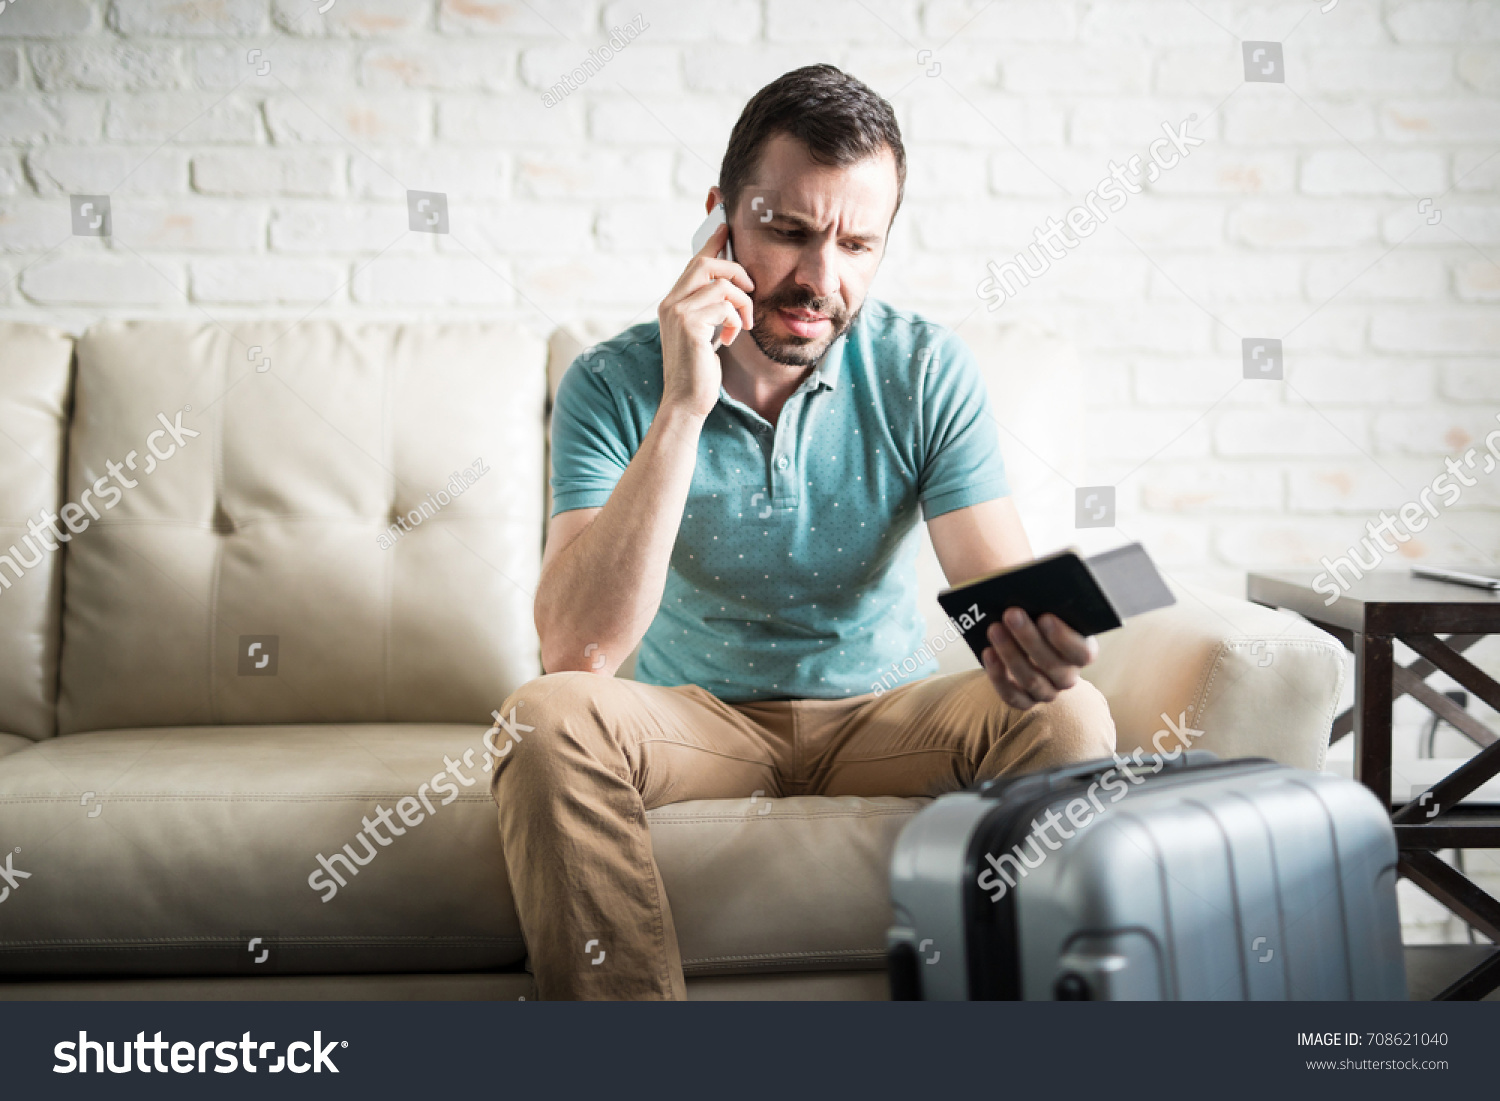 Good Looking Man On Phone Making Stock Photo Edit Now 708621040